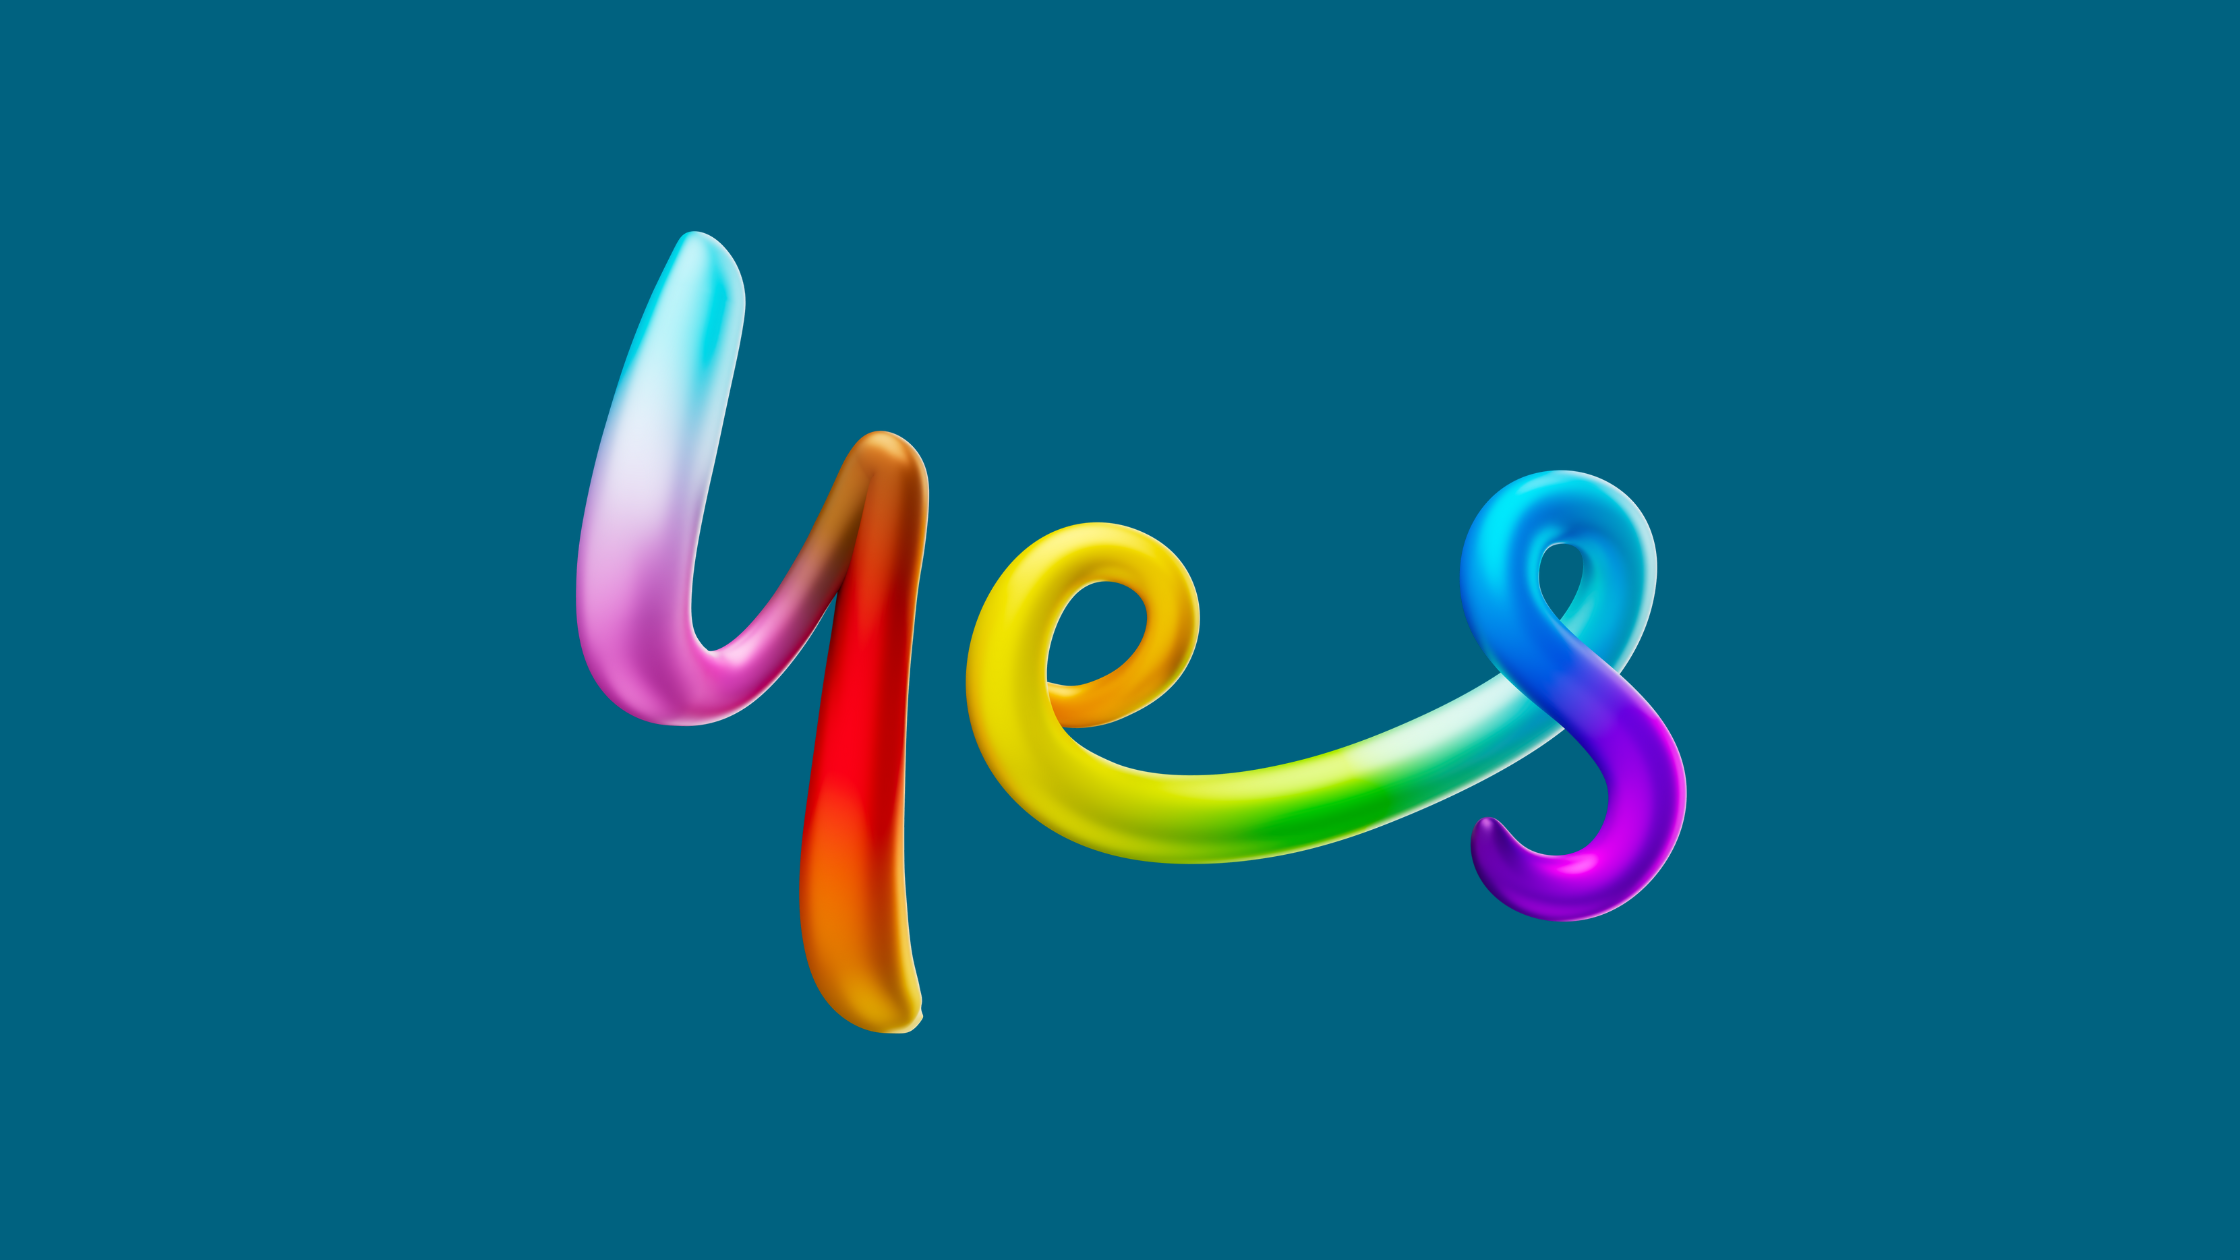 The word 'Yes' is rainbow-coloured on a dark jade background. It is the 'Yes Optus' logo.